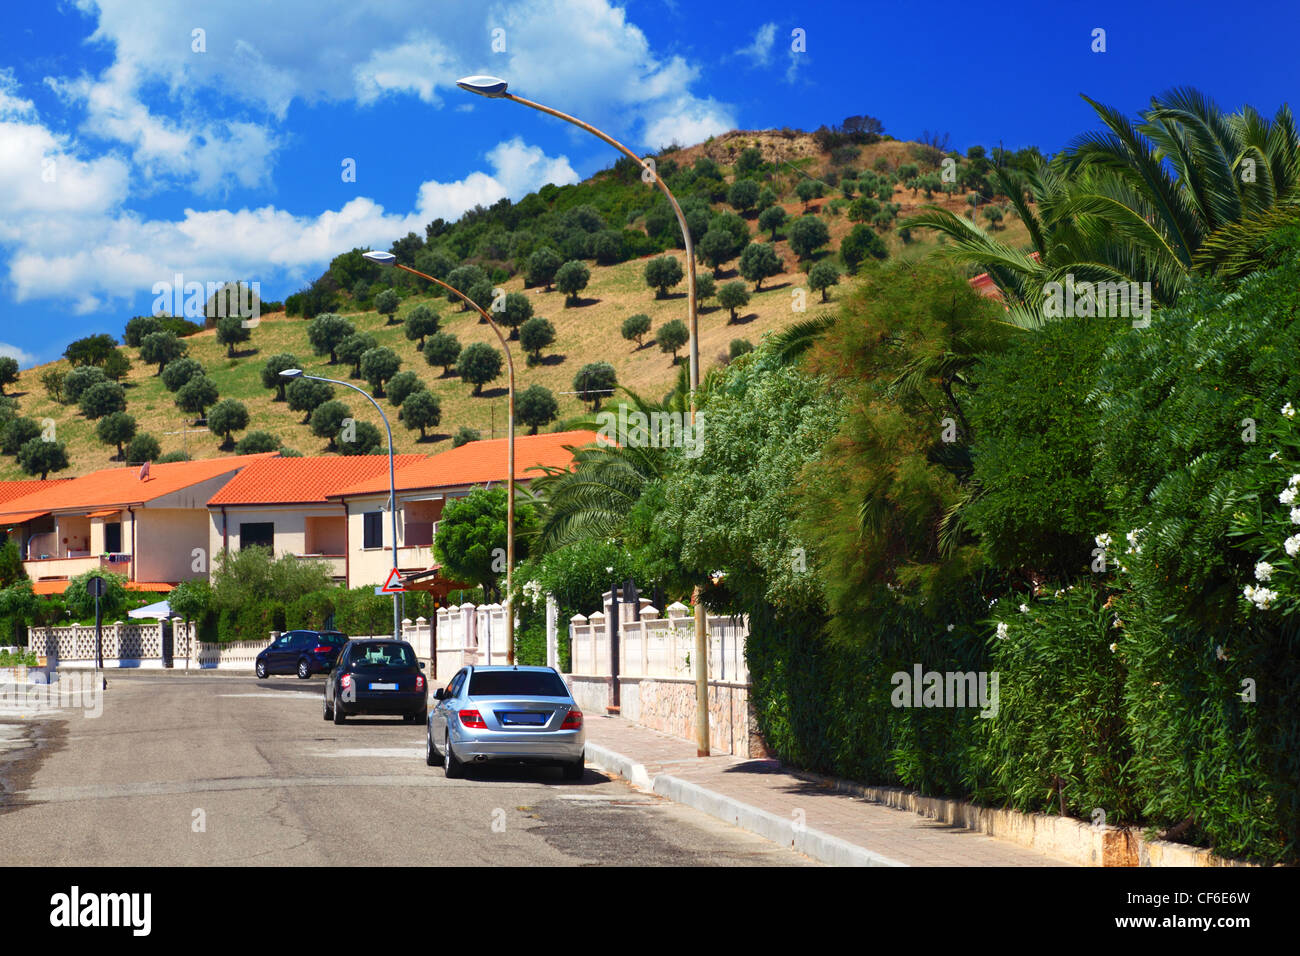 Cars park to sidewalks where are palm trees in residential area Stock Photo